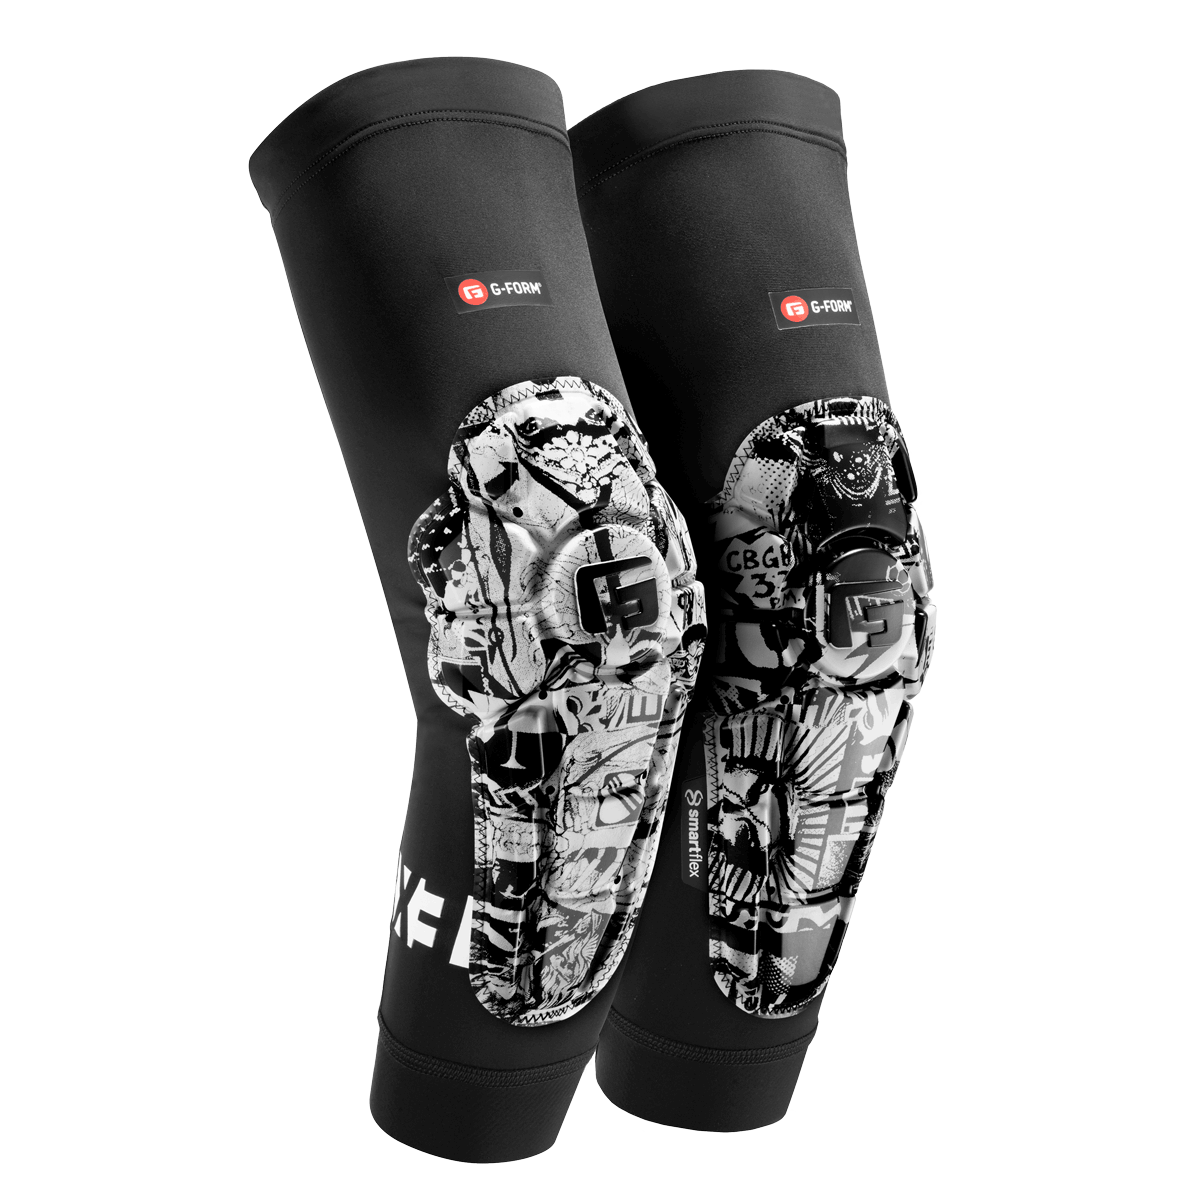 Pro-X3 Elbow Guards - Limited Edition